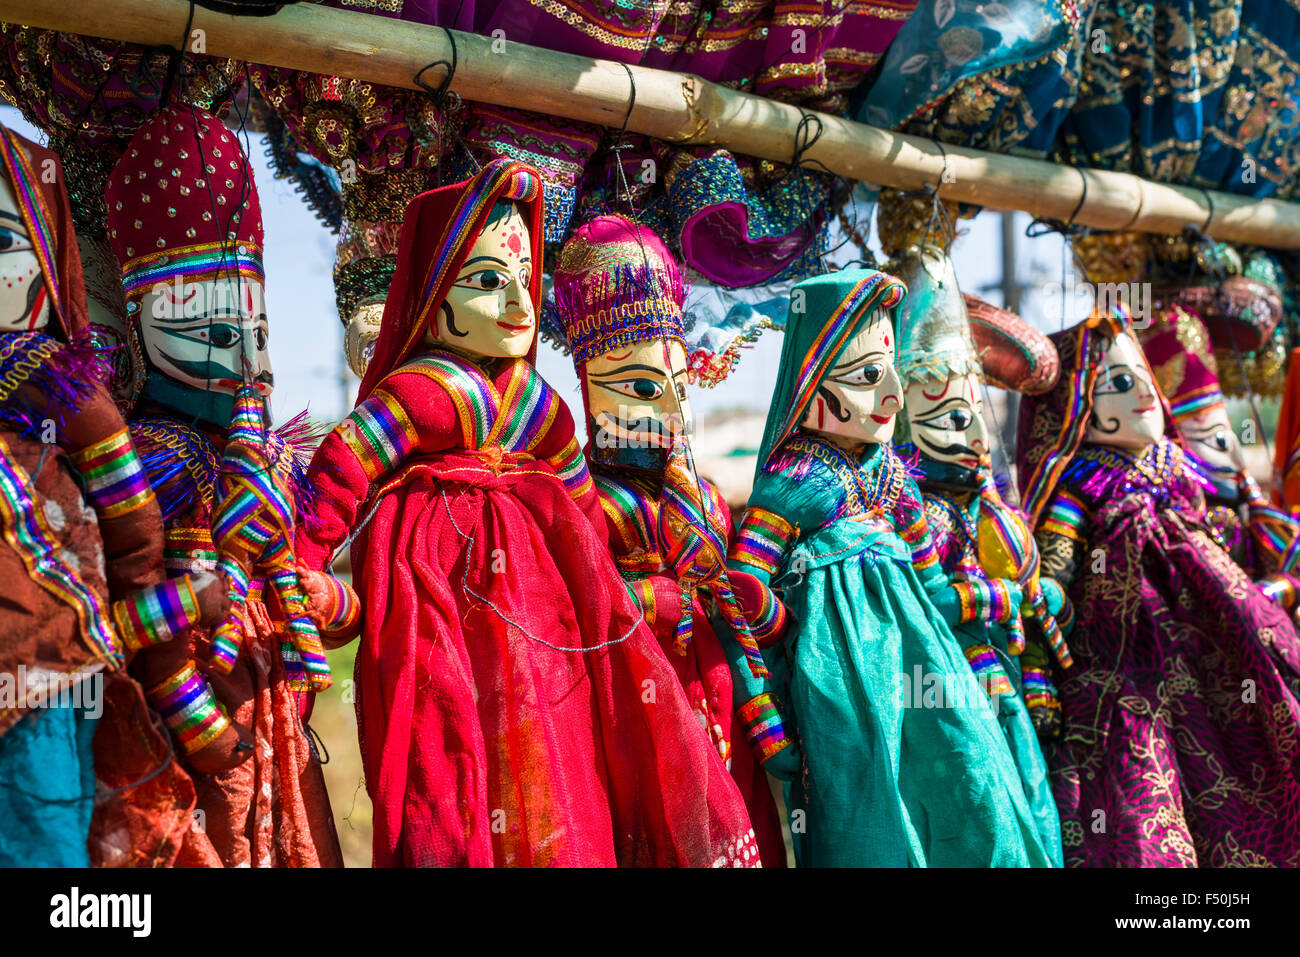 Many different goods like artfully designed rajasthany string puppets are presented for sale at the weekly fleamarket Stock Photo